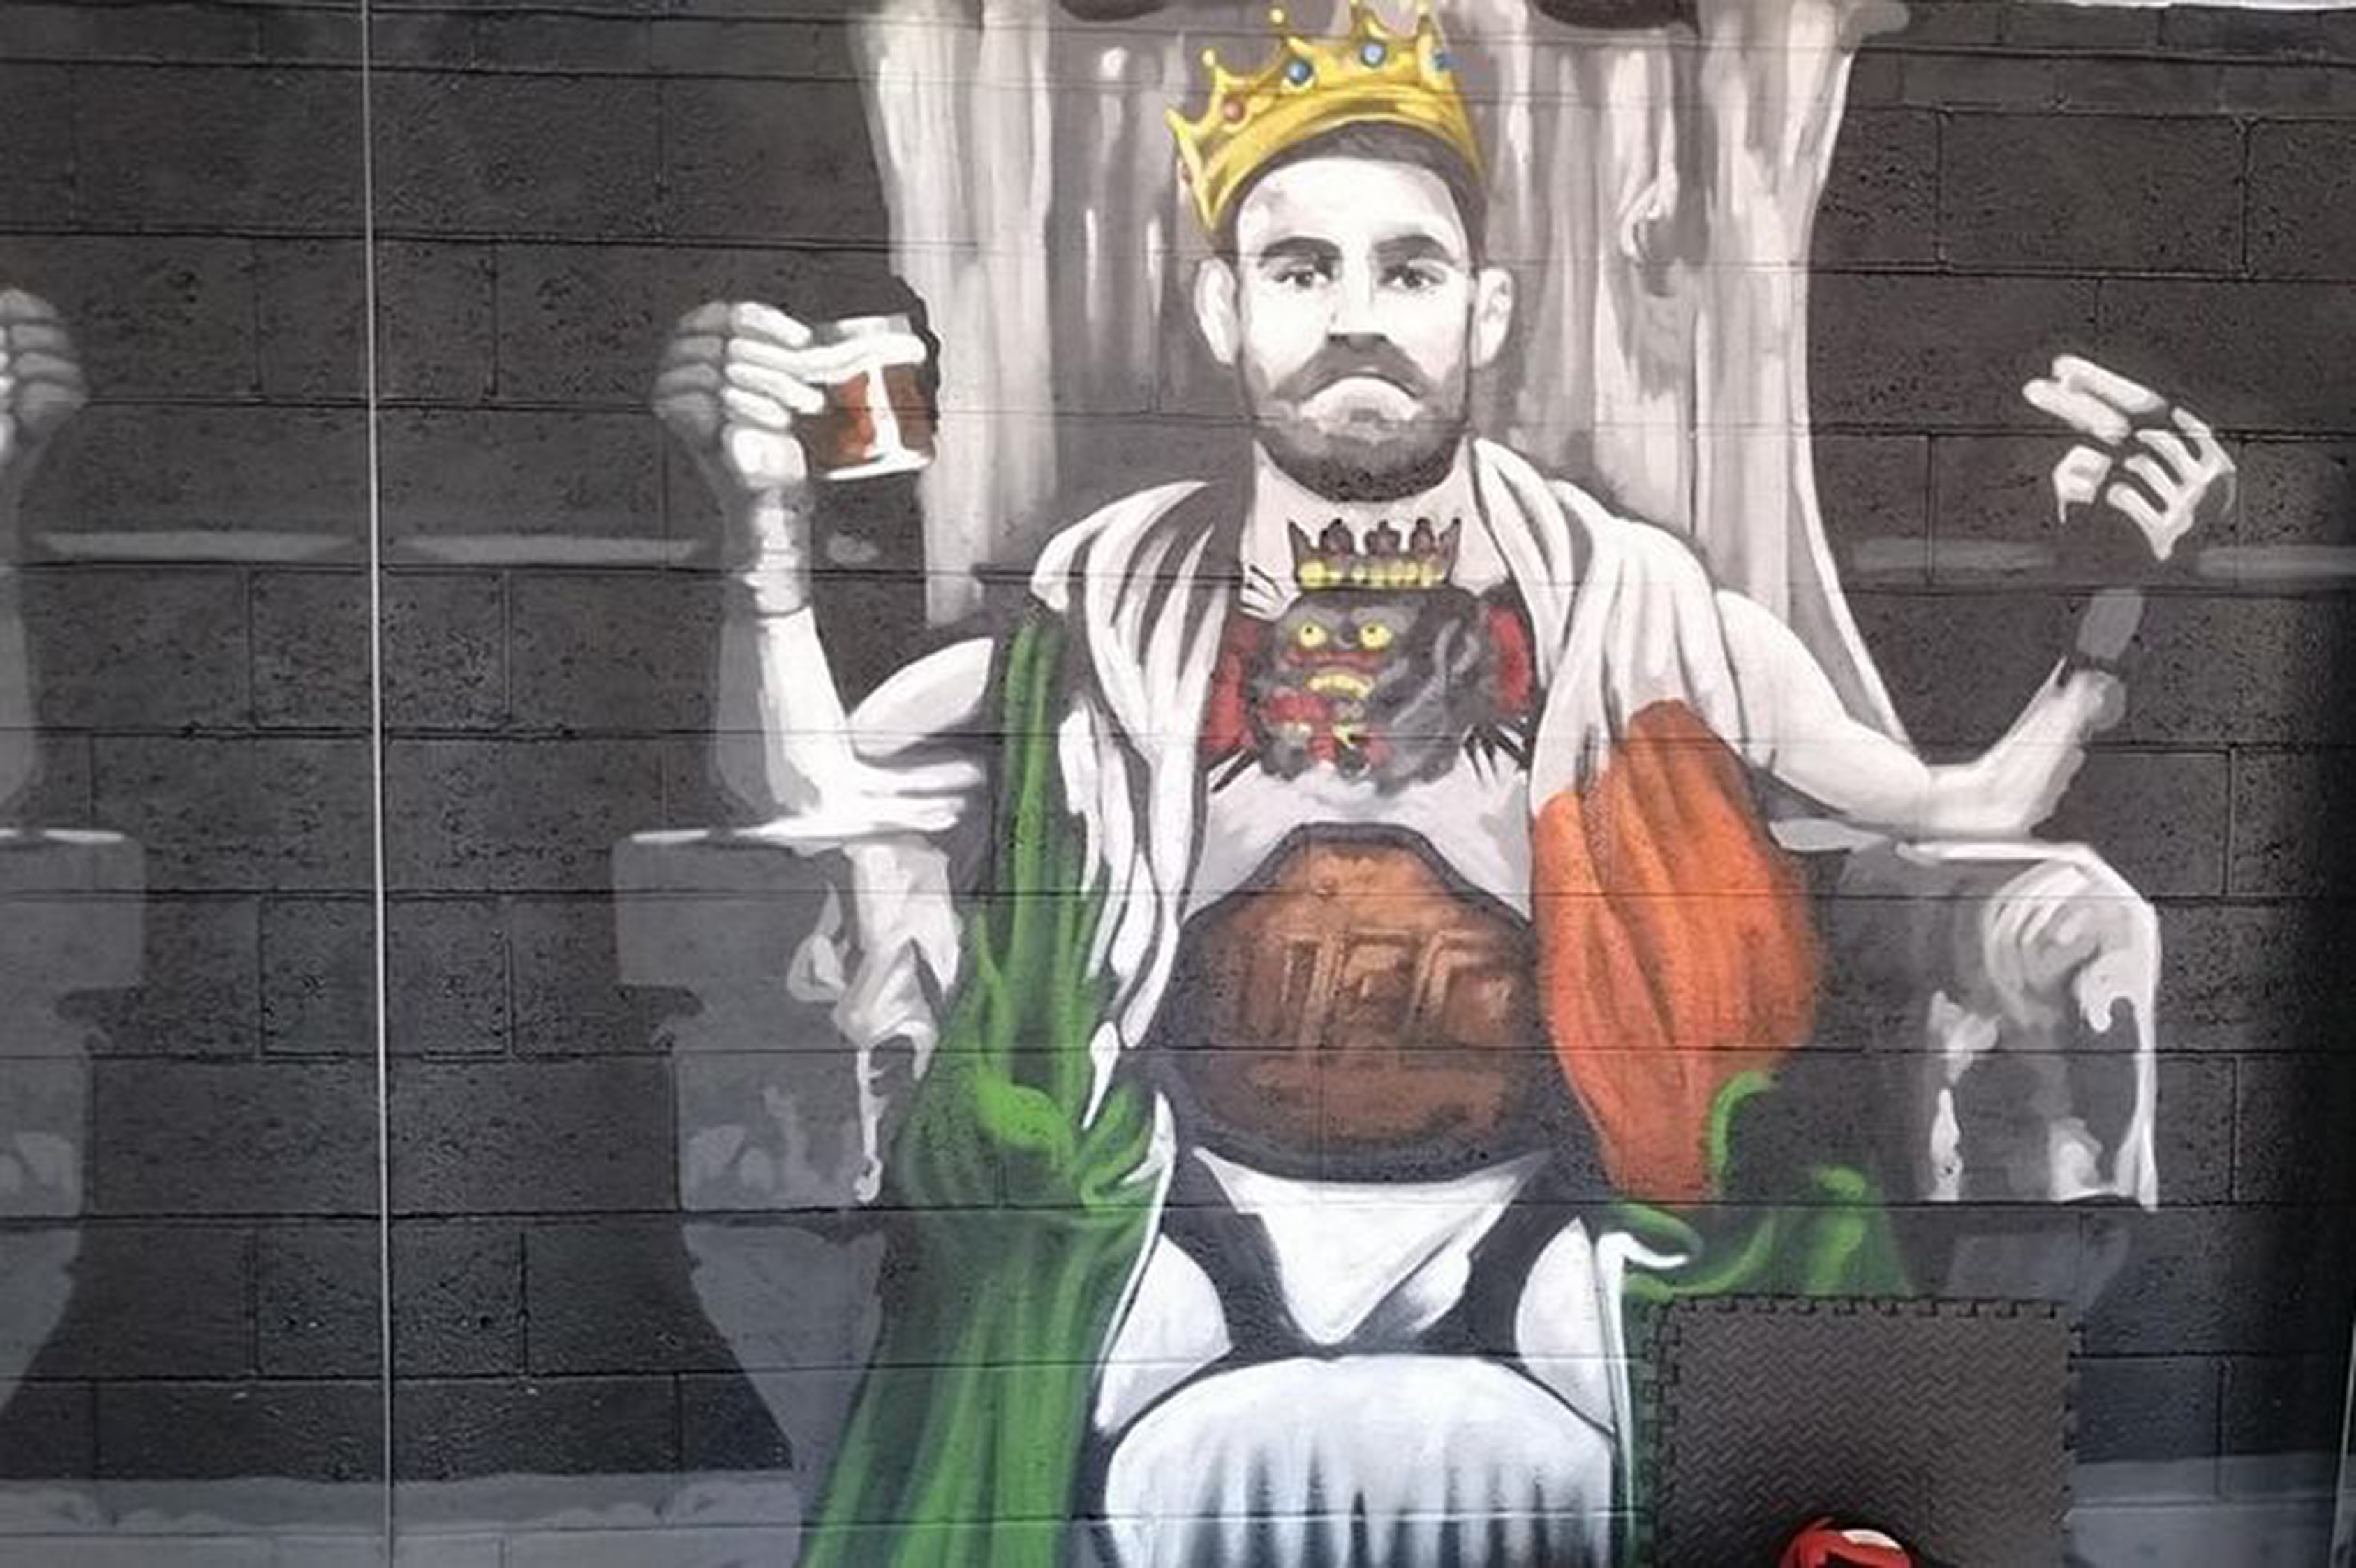 The Conor McGregor mural inside the home of convicted drug dealer Ryan Palin.